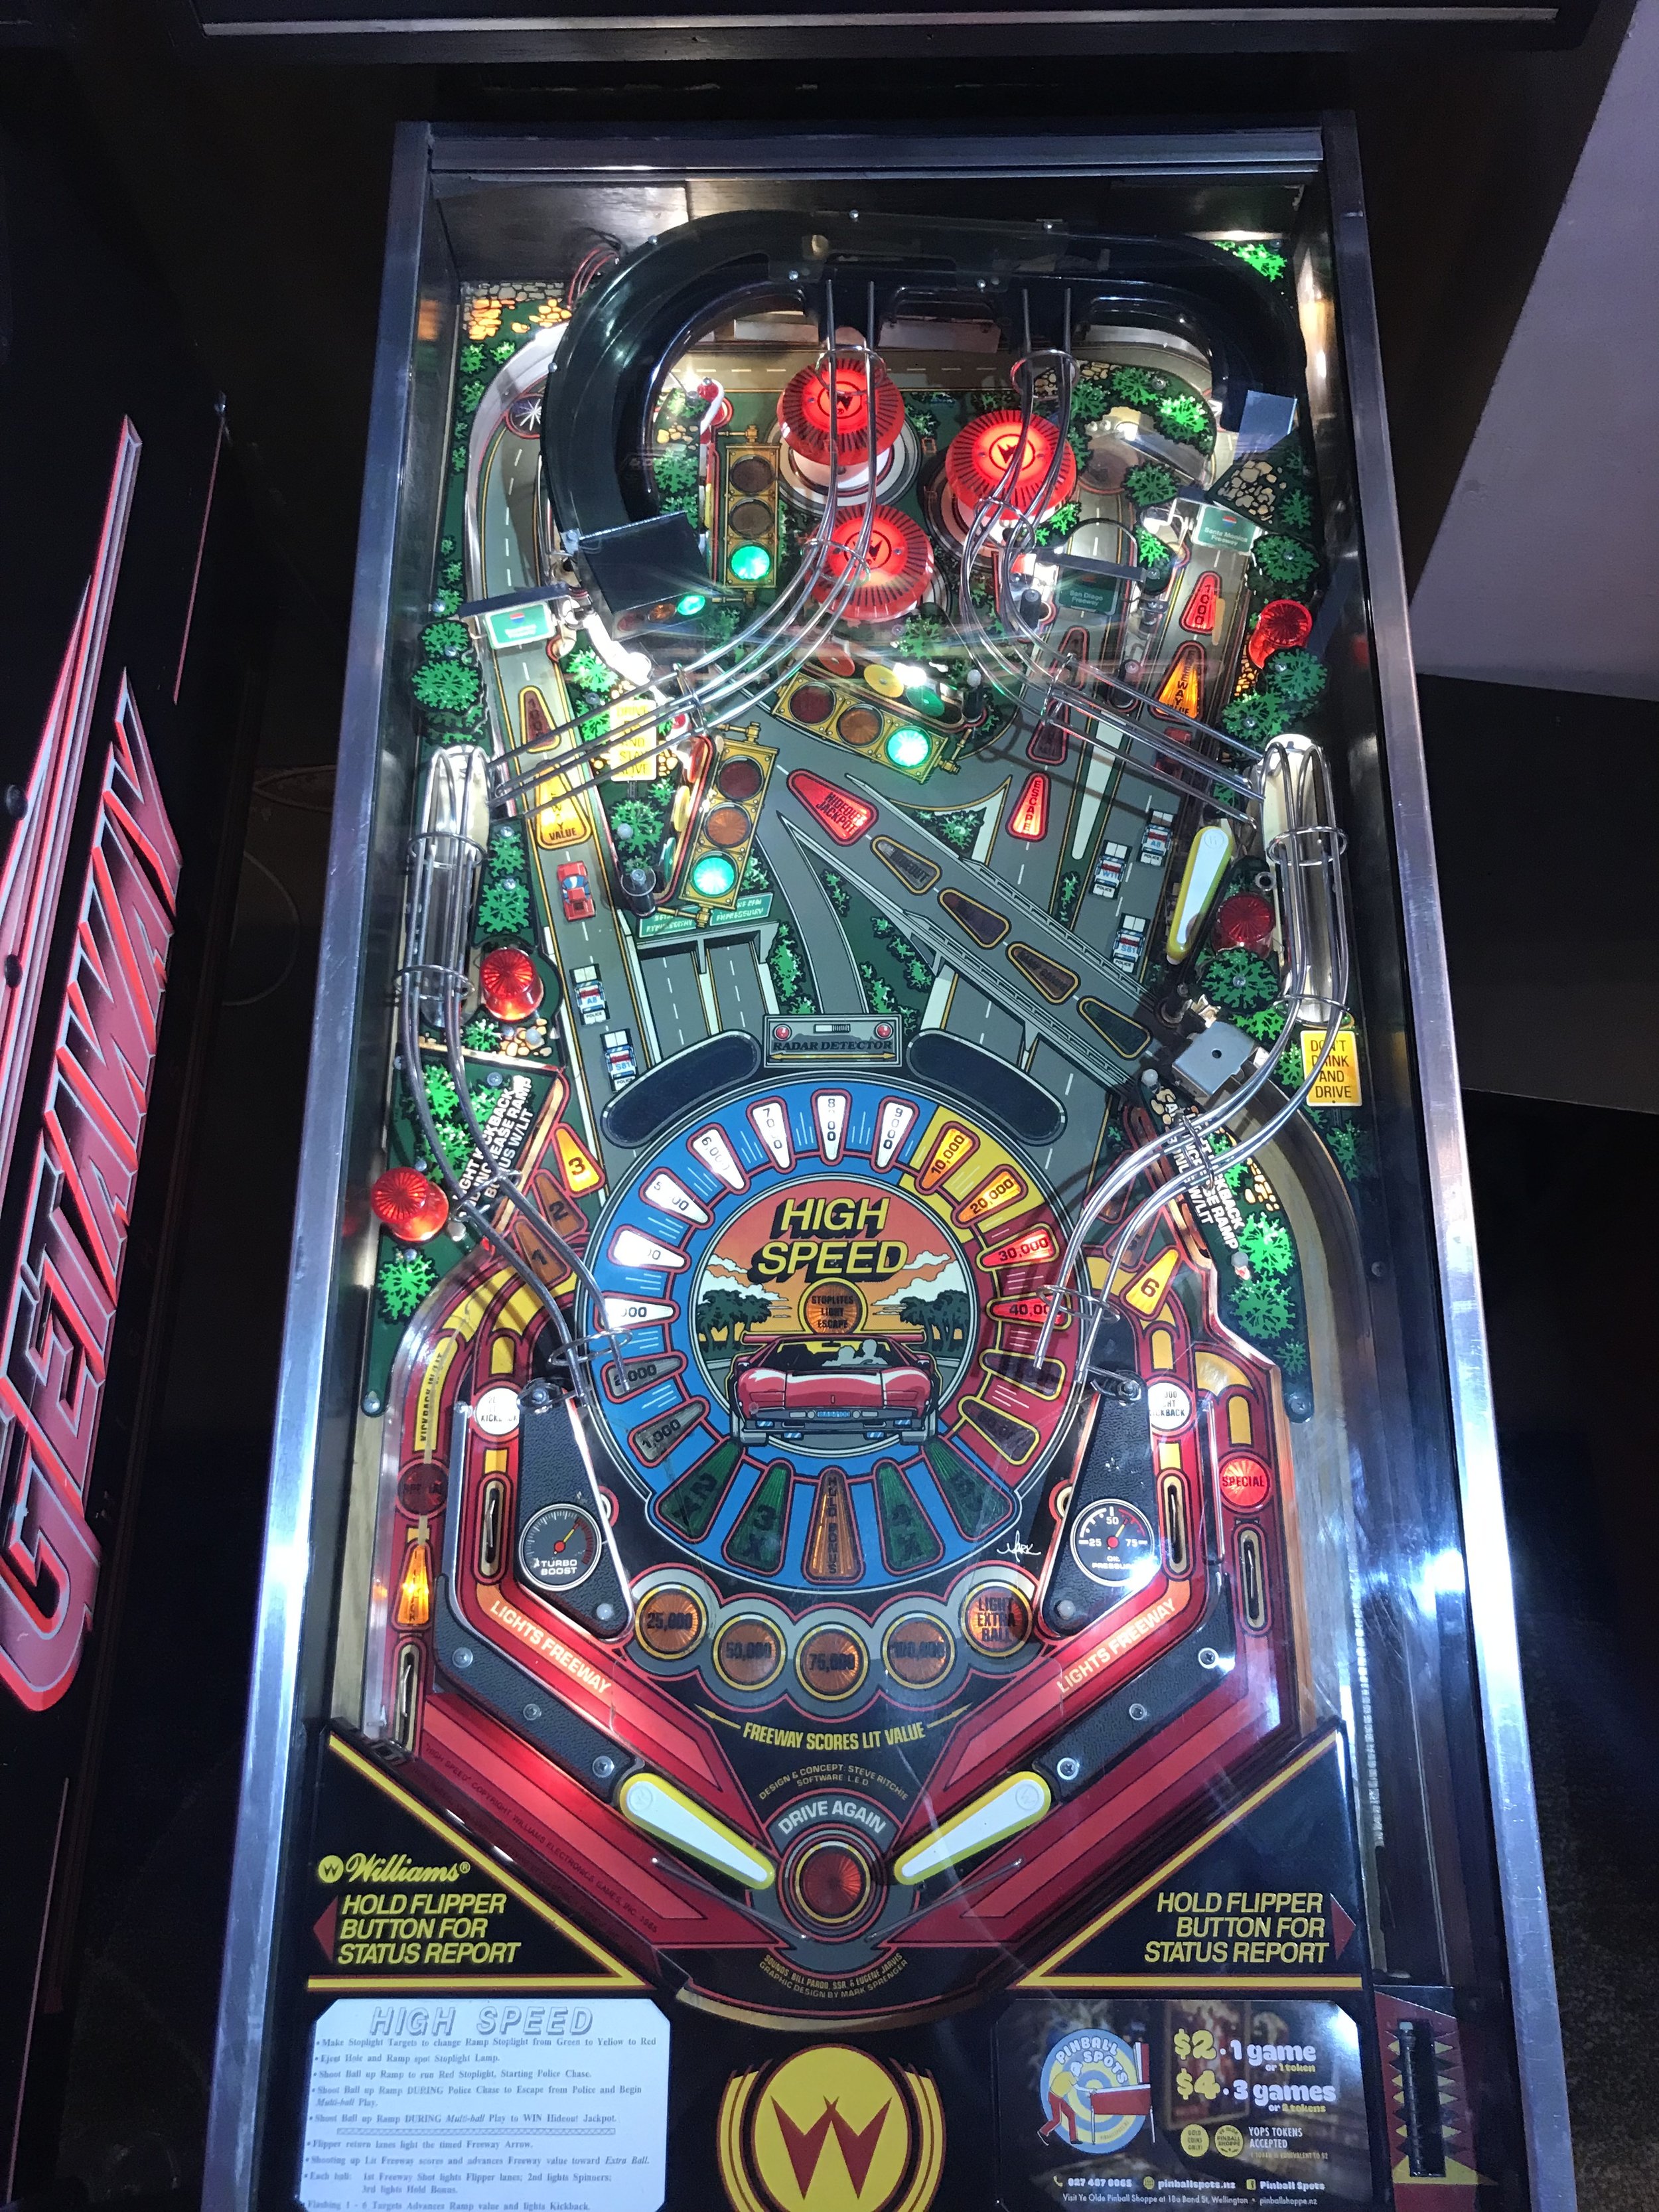 The Wild History of the Beloved 'Addams Family' Pinball Machine